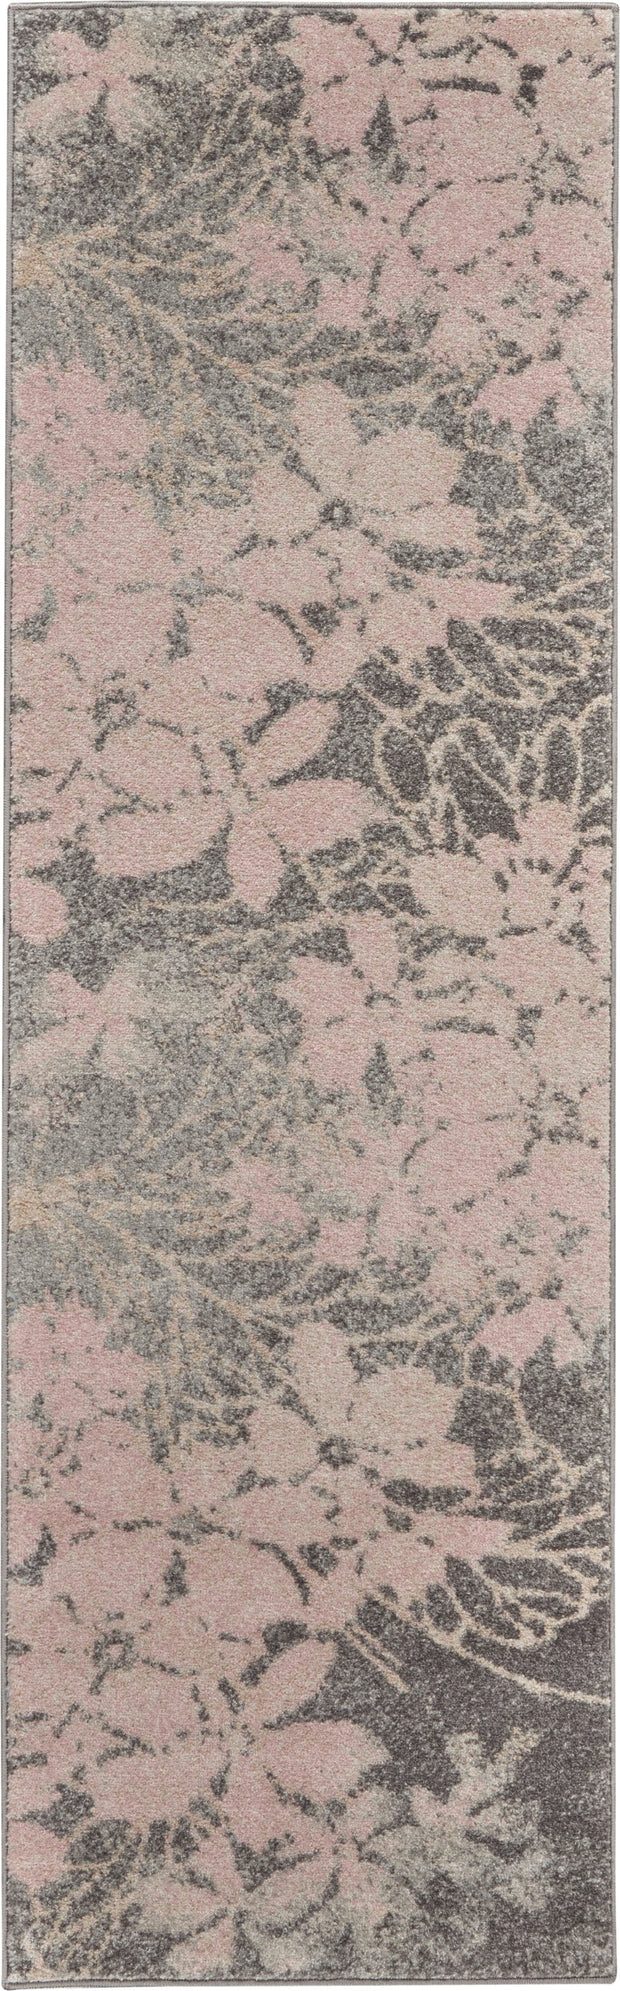 tranquil grey pink rug by nourison 99446486189 redo 3